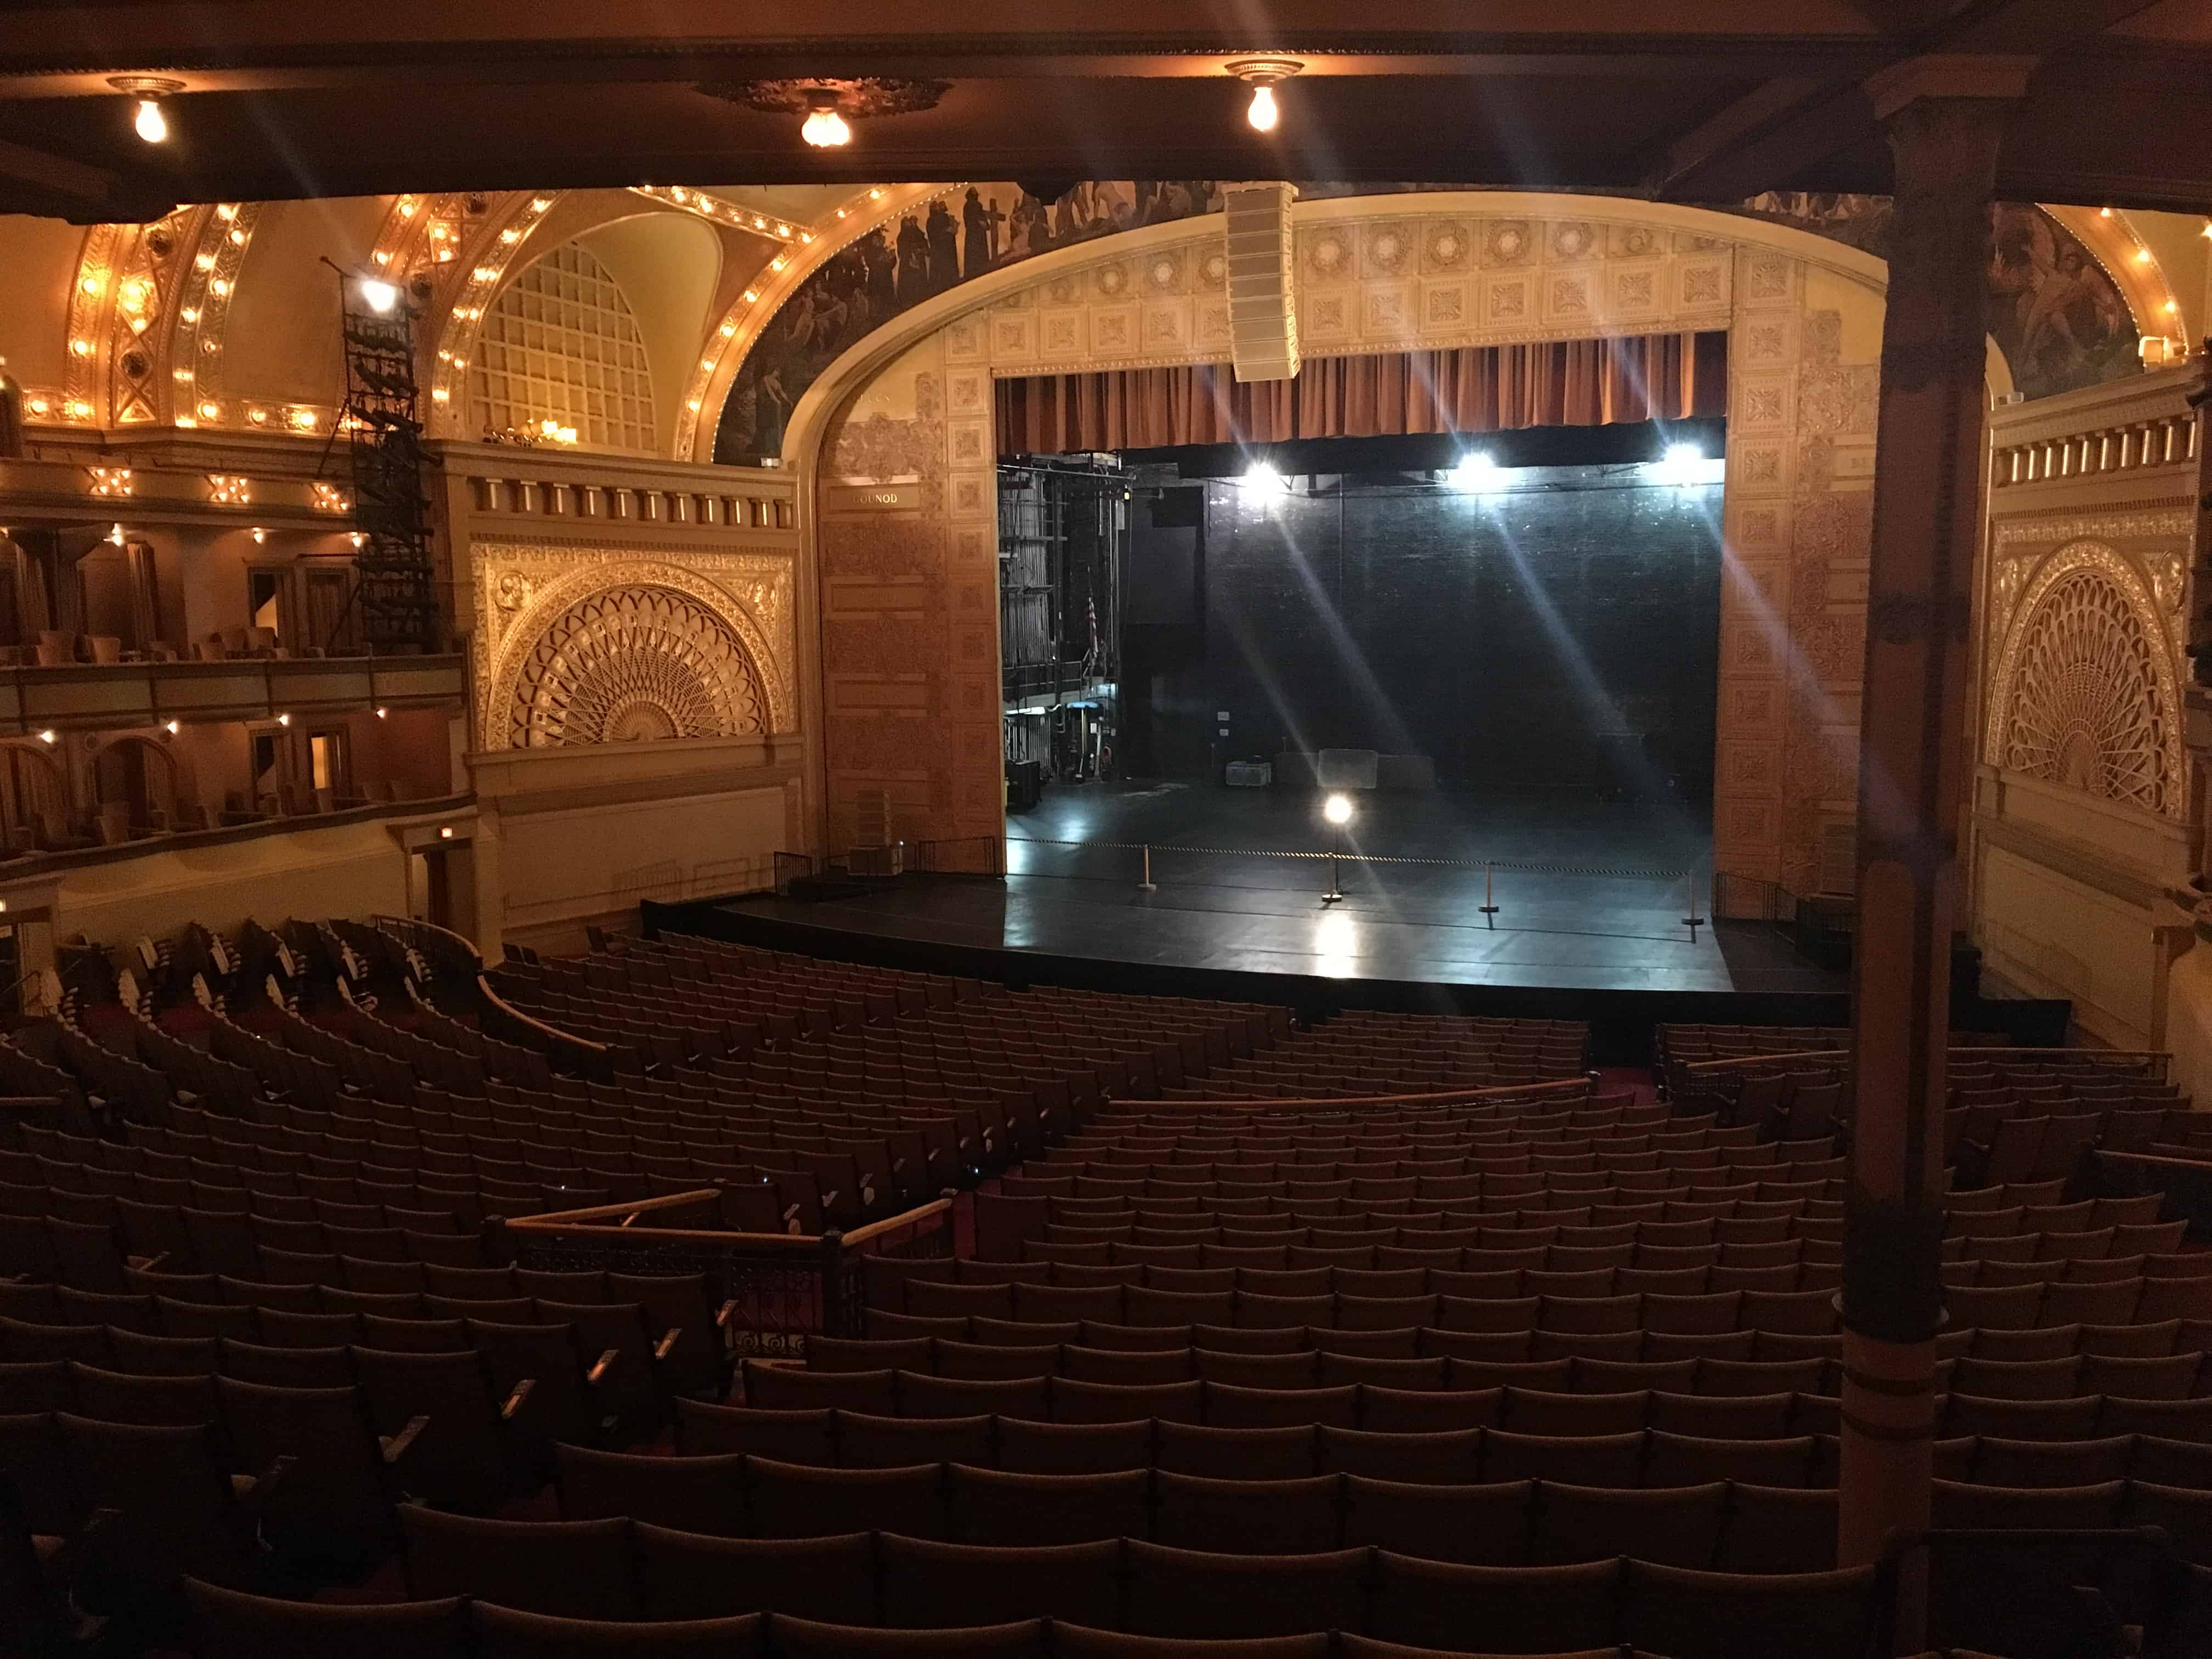 View from near the luxury boxes in the Auditorium Theatre in Chicago, Illinois